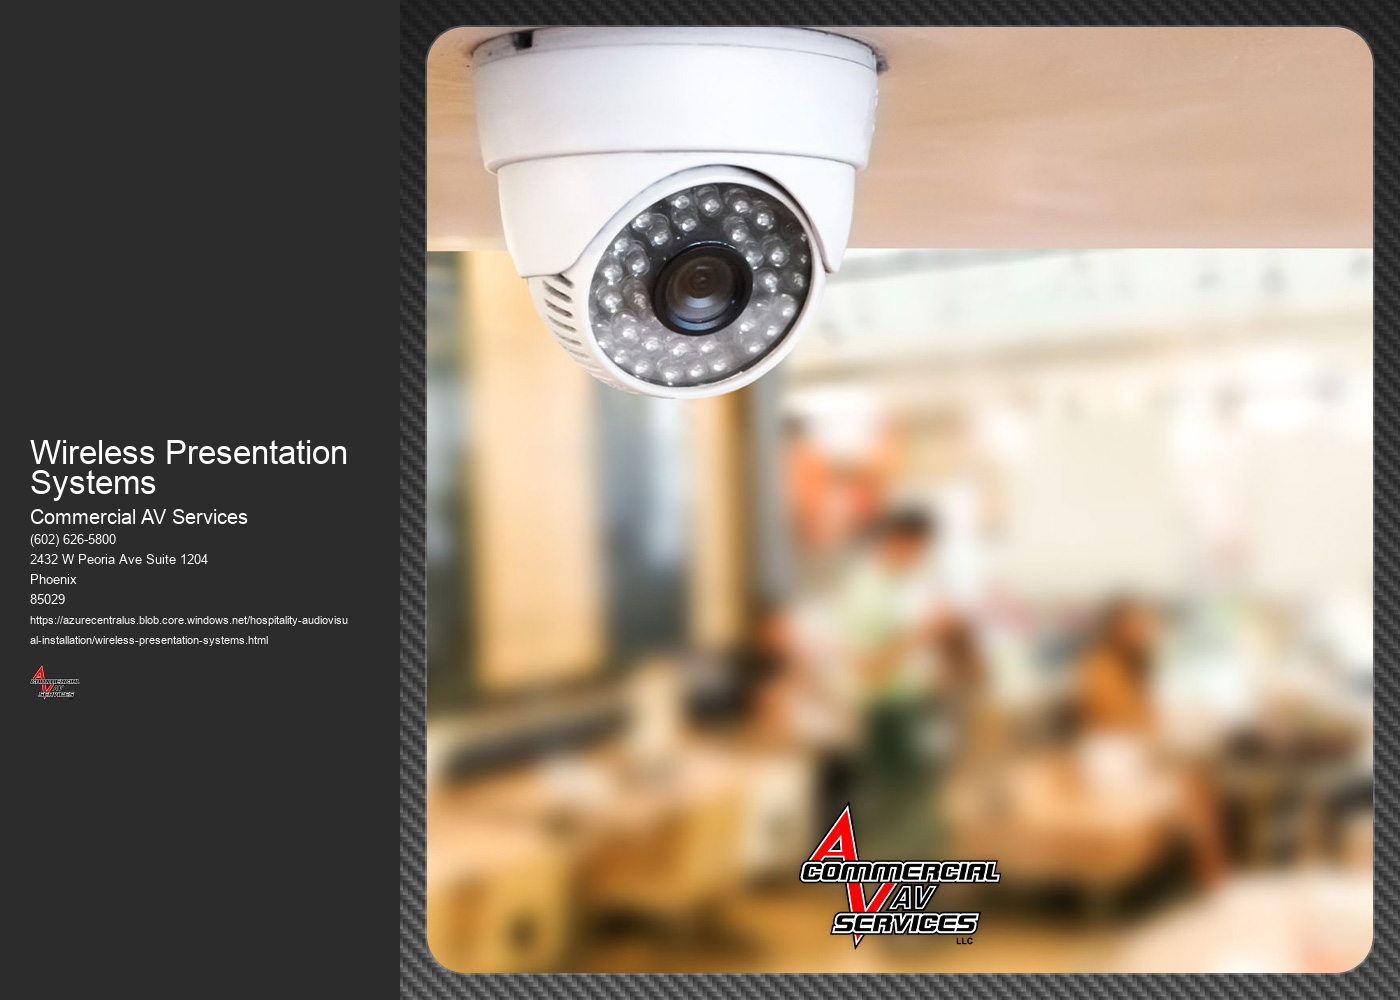 What are the advantages of using wireless presentation systems over traditional wired solutions?